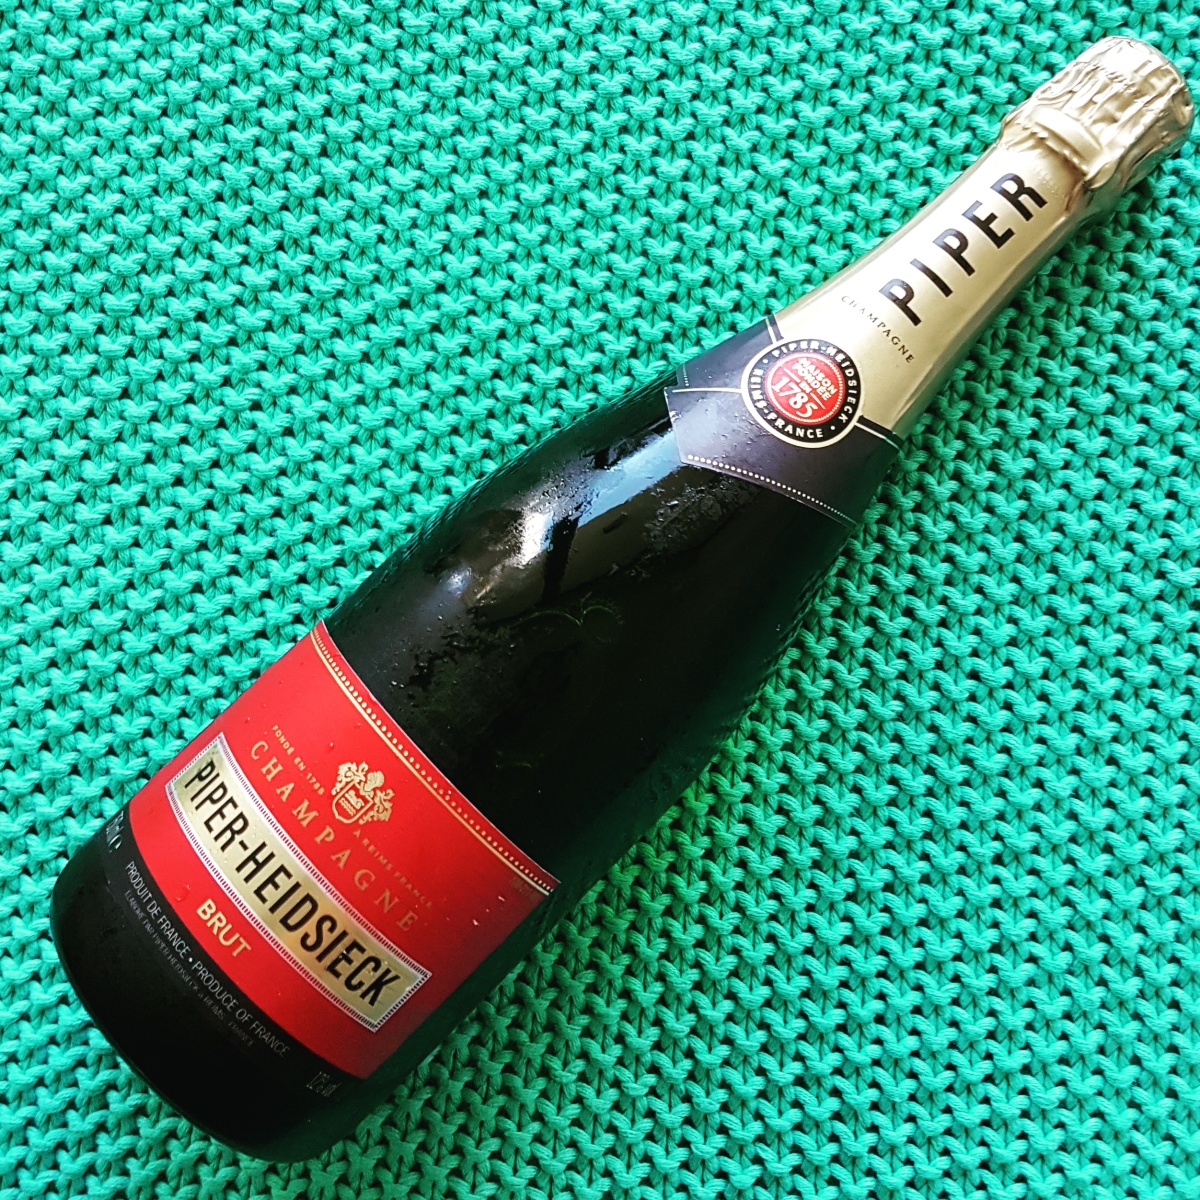 Review: Piper Heidsieck Cuvee Brut NV Champagne – Tips